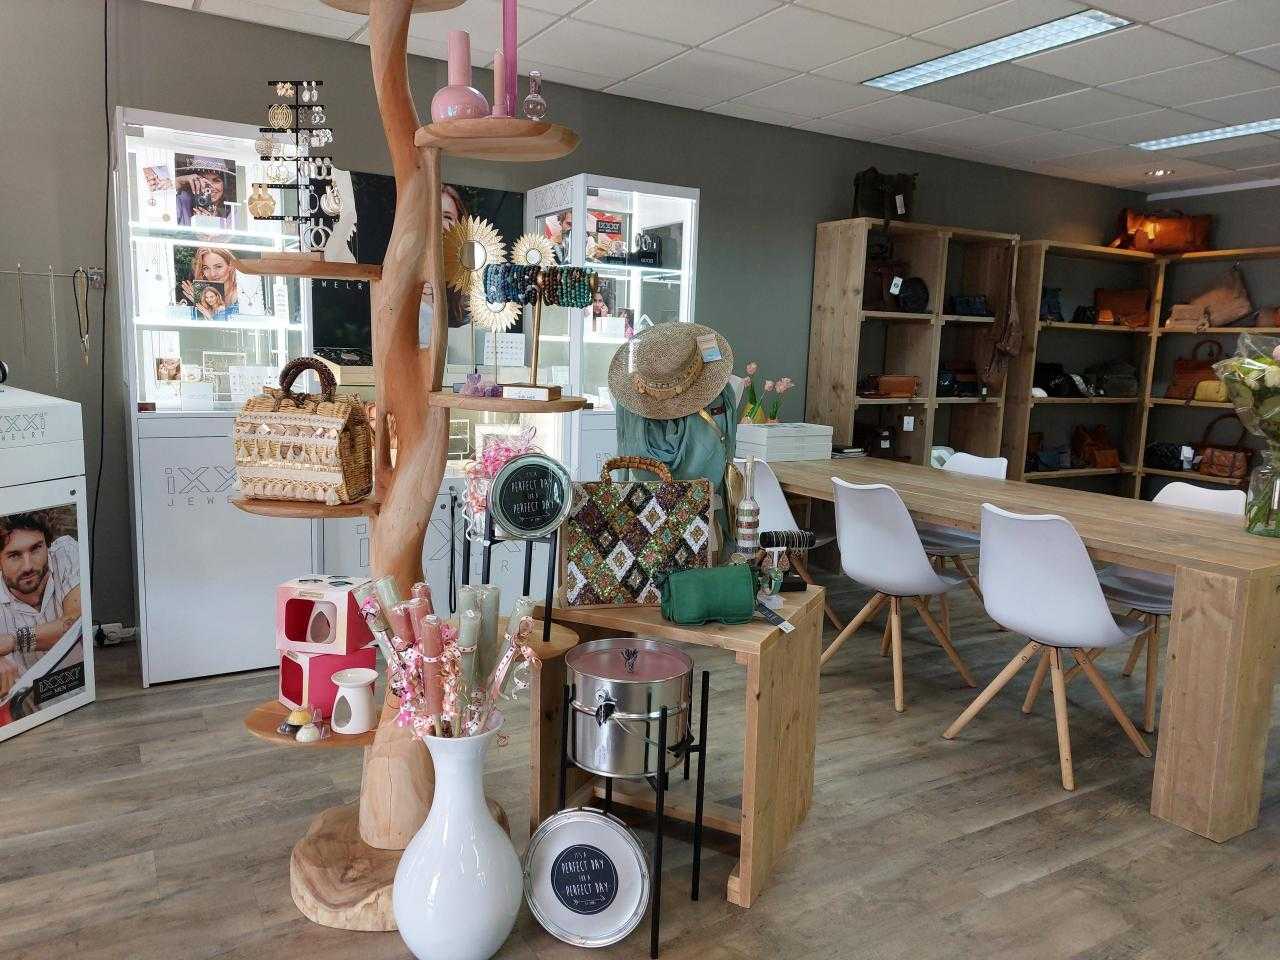 Shop interior with chairs, bags and accessories